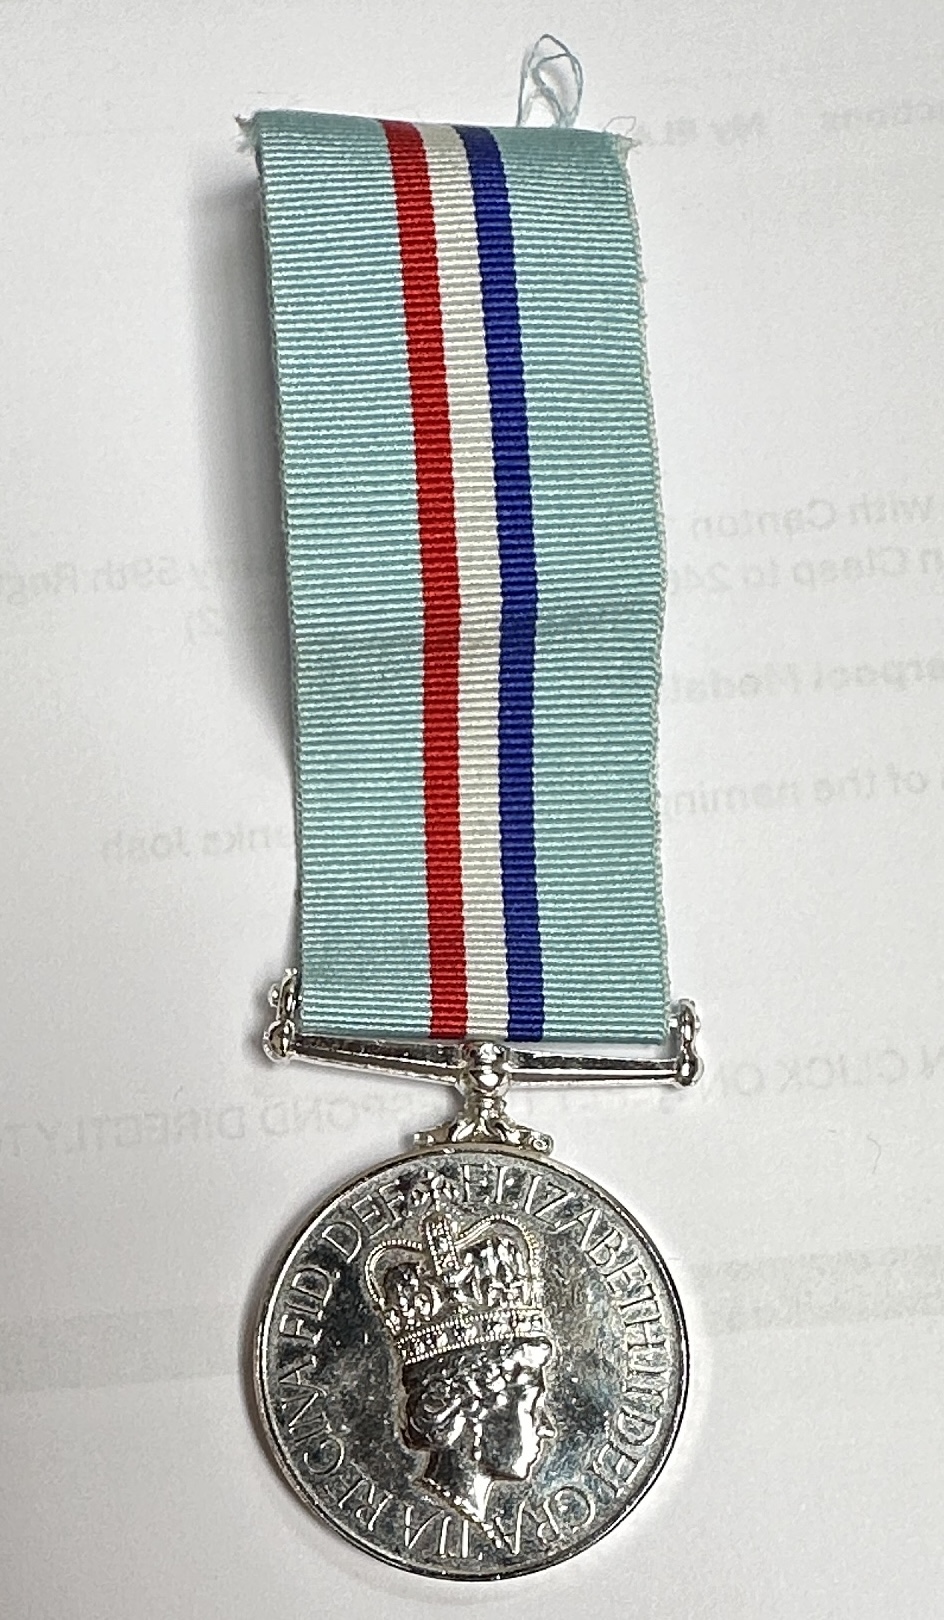 The Rhodesia Medal 1980 to '24442182 Sig S.J. Townsend. R. Signals,' together with The Zimbabwe - Image 6 of 8